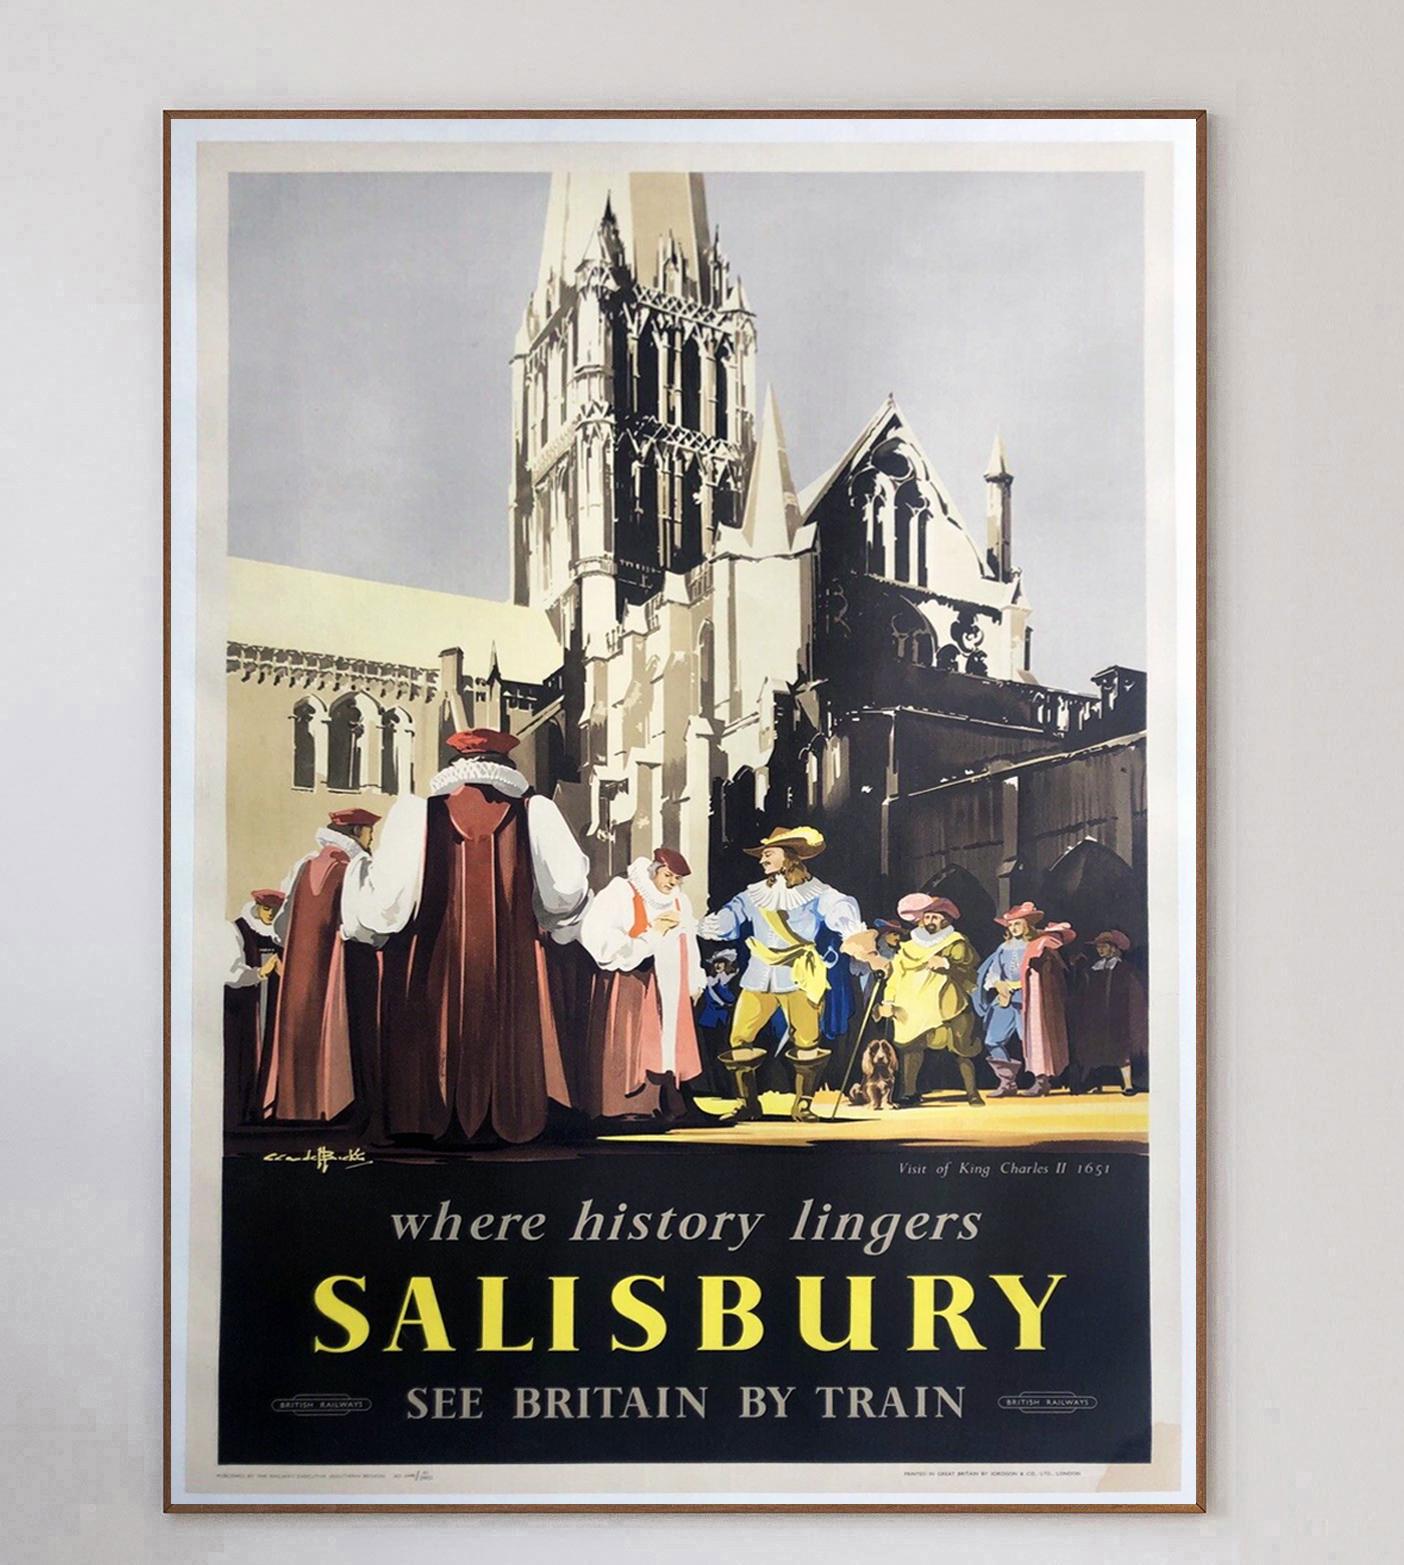 Showing the visit of King Charles II in 1651, this wonderful poster was part of a small series by the company with artwork from Claude Henry Buckle to promote the historical significance of British cities.

With Salisbury Cathedral in the backdrop